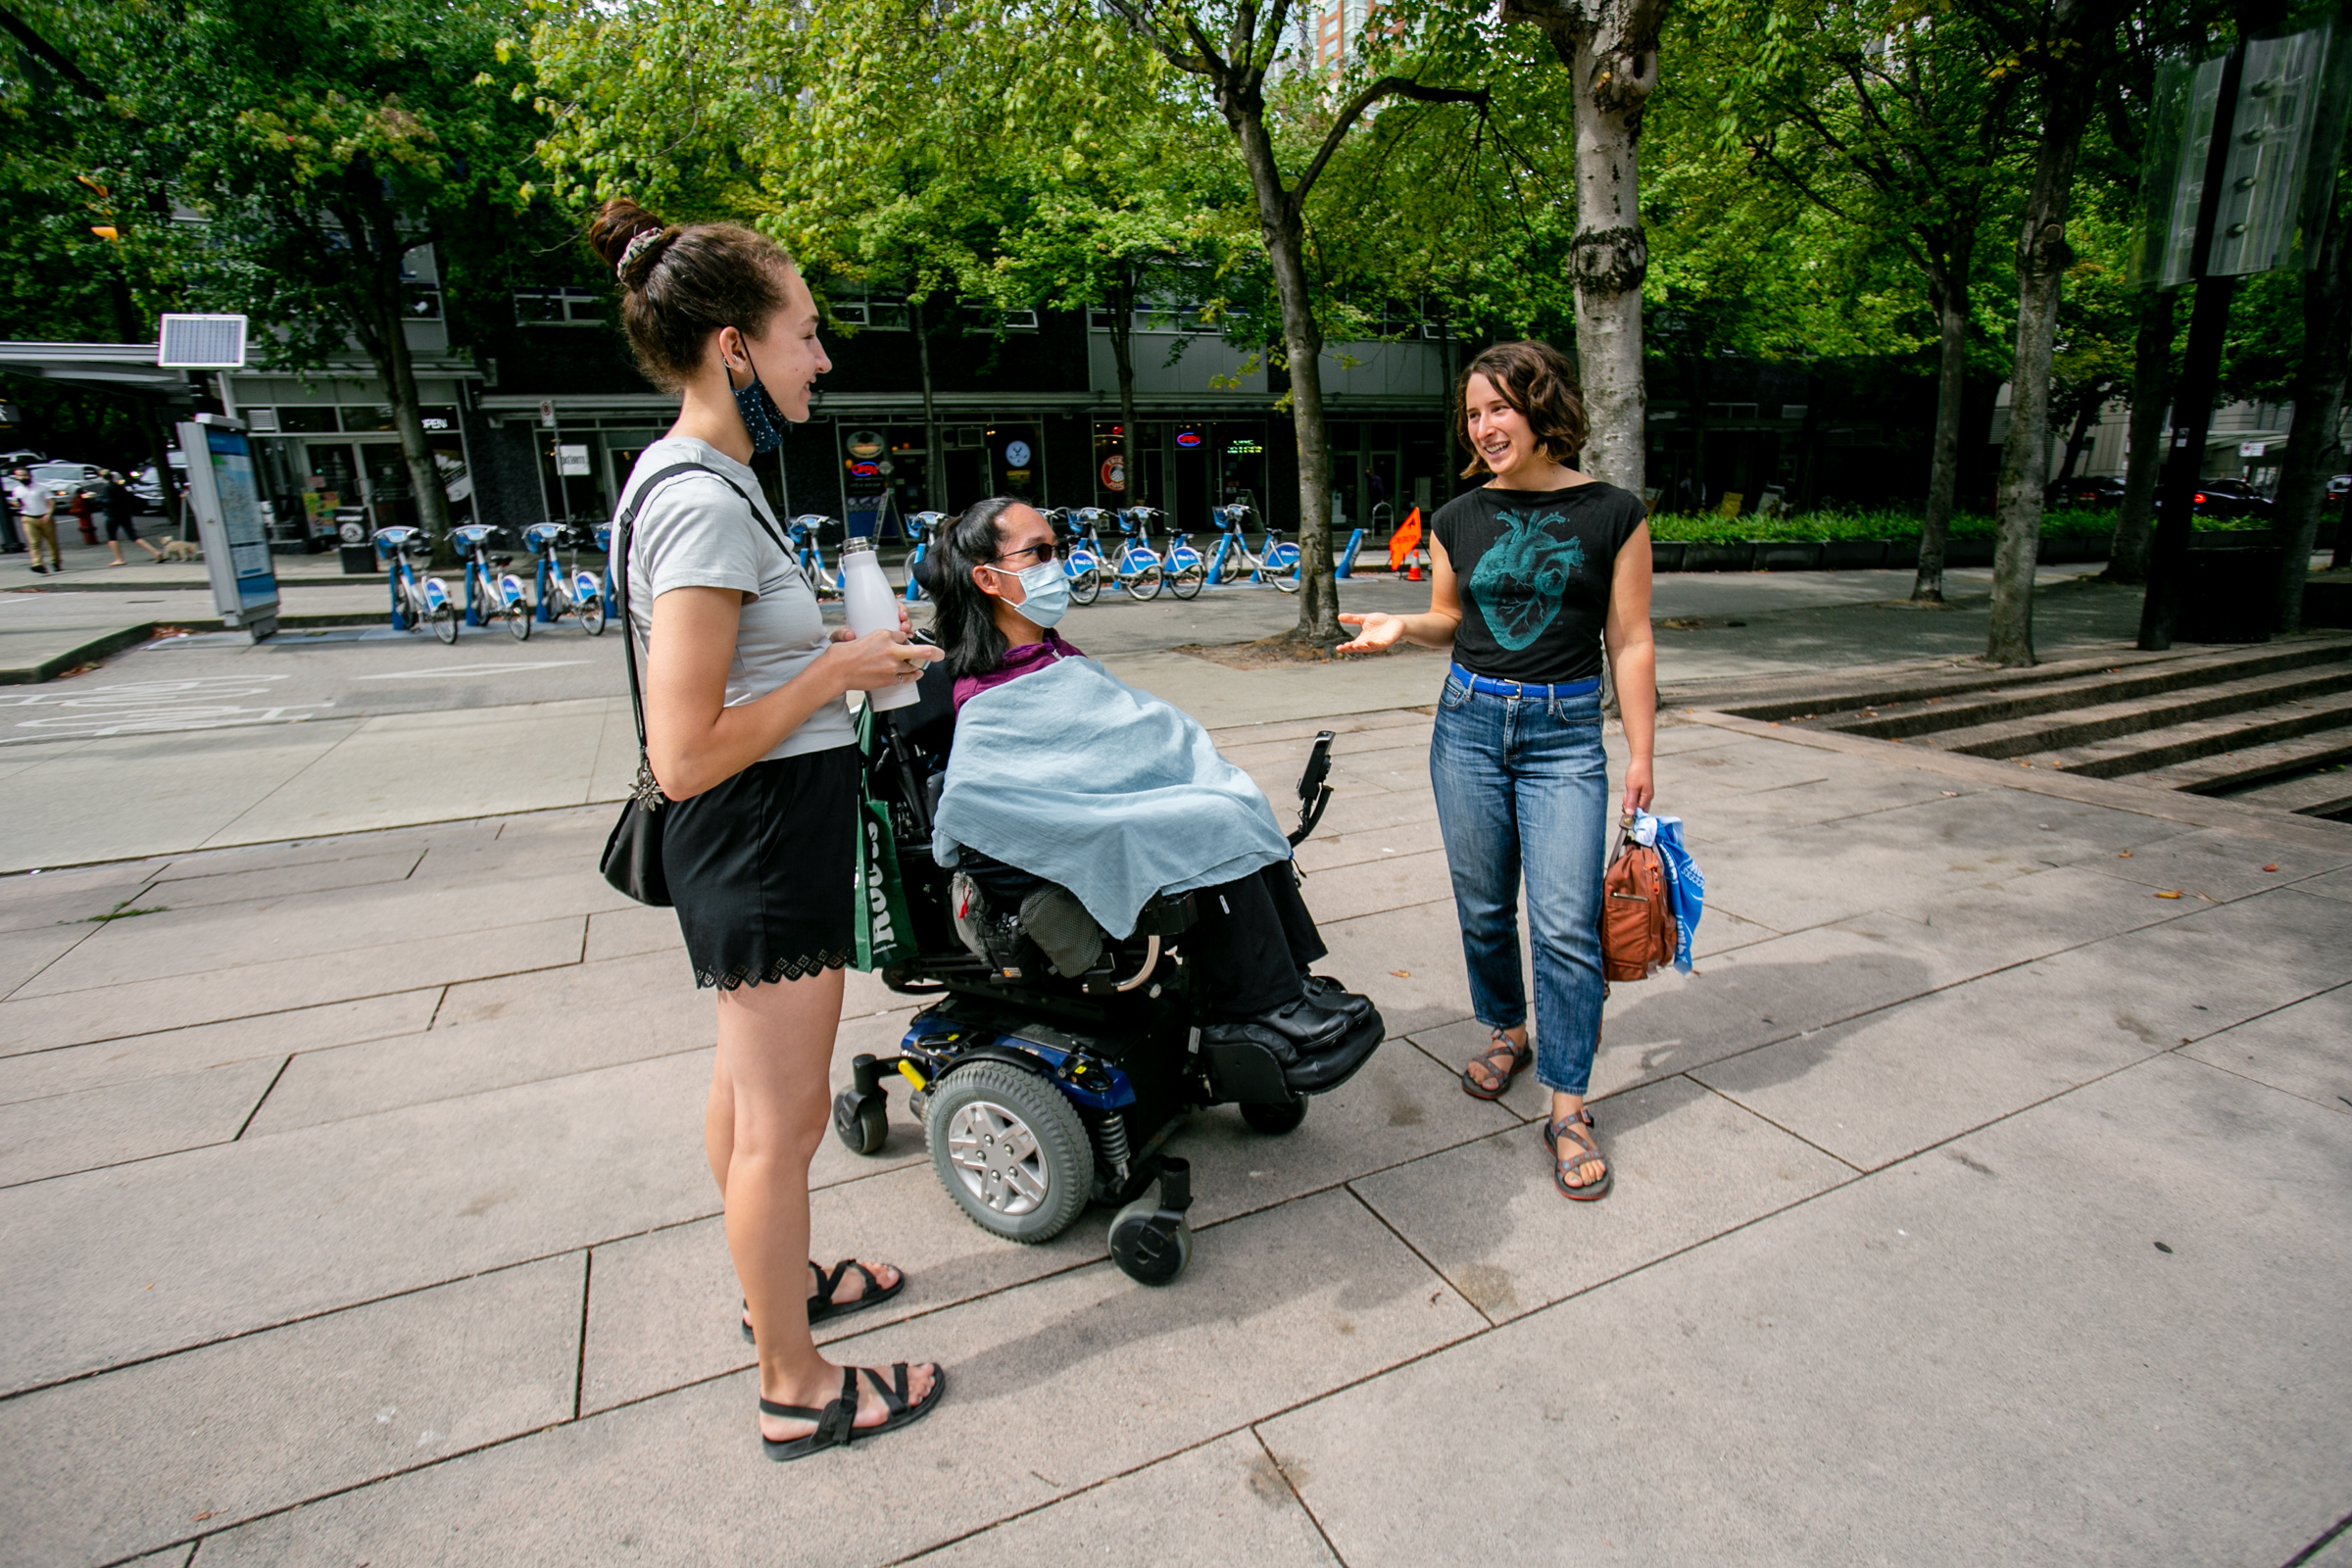 a woman using a power wheelchair and two standing people smile mid conversation. behind them is a series of bike shares.